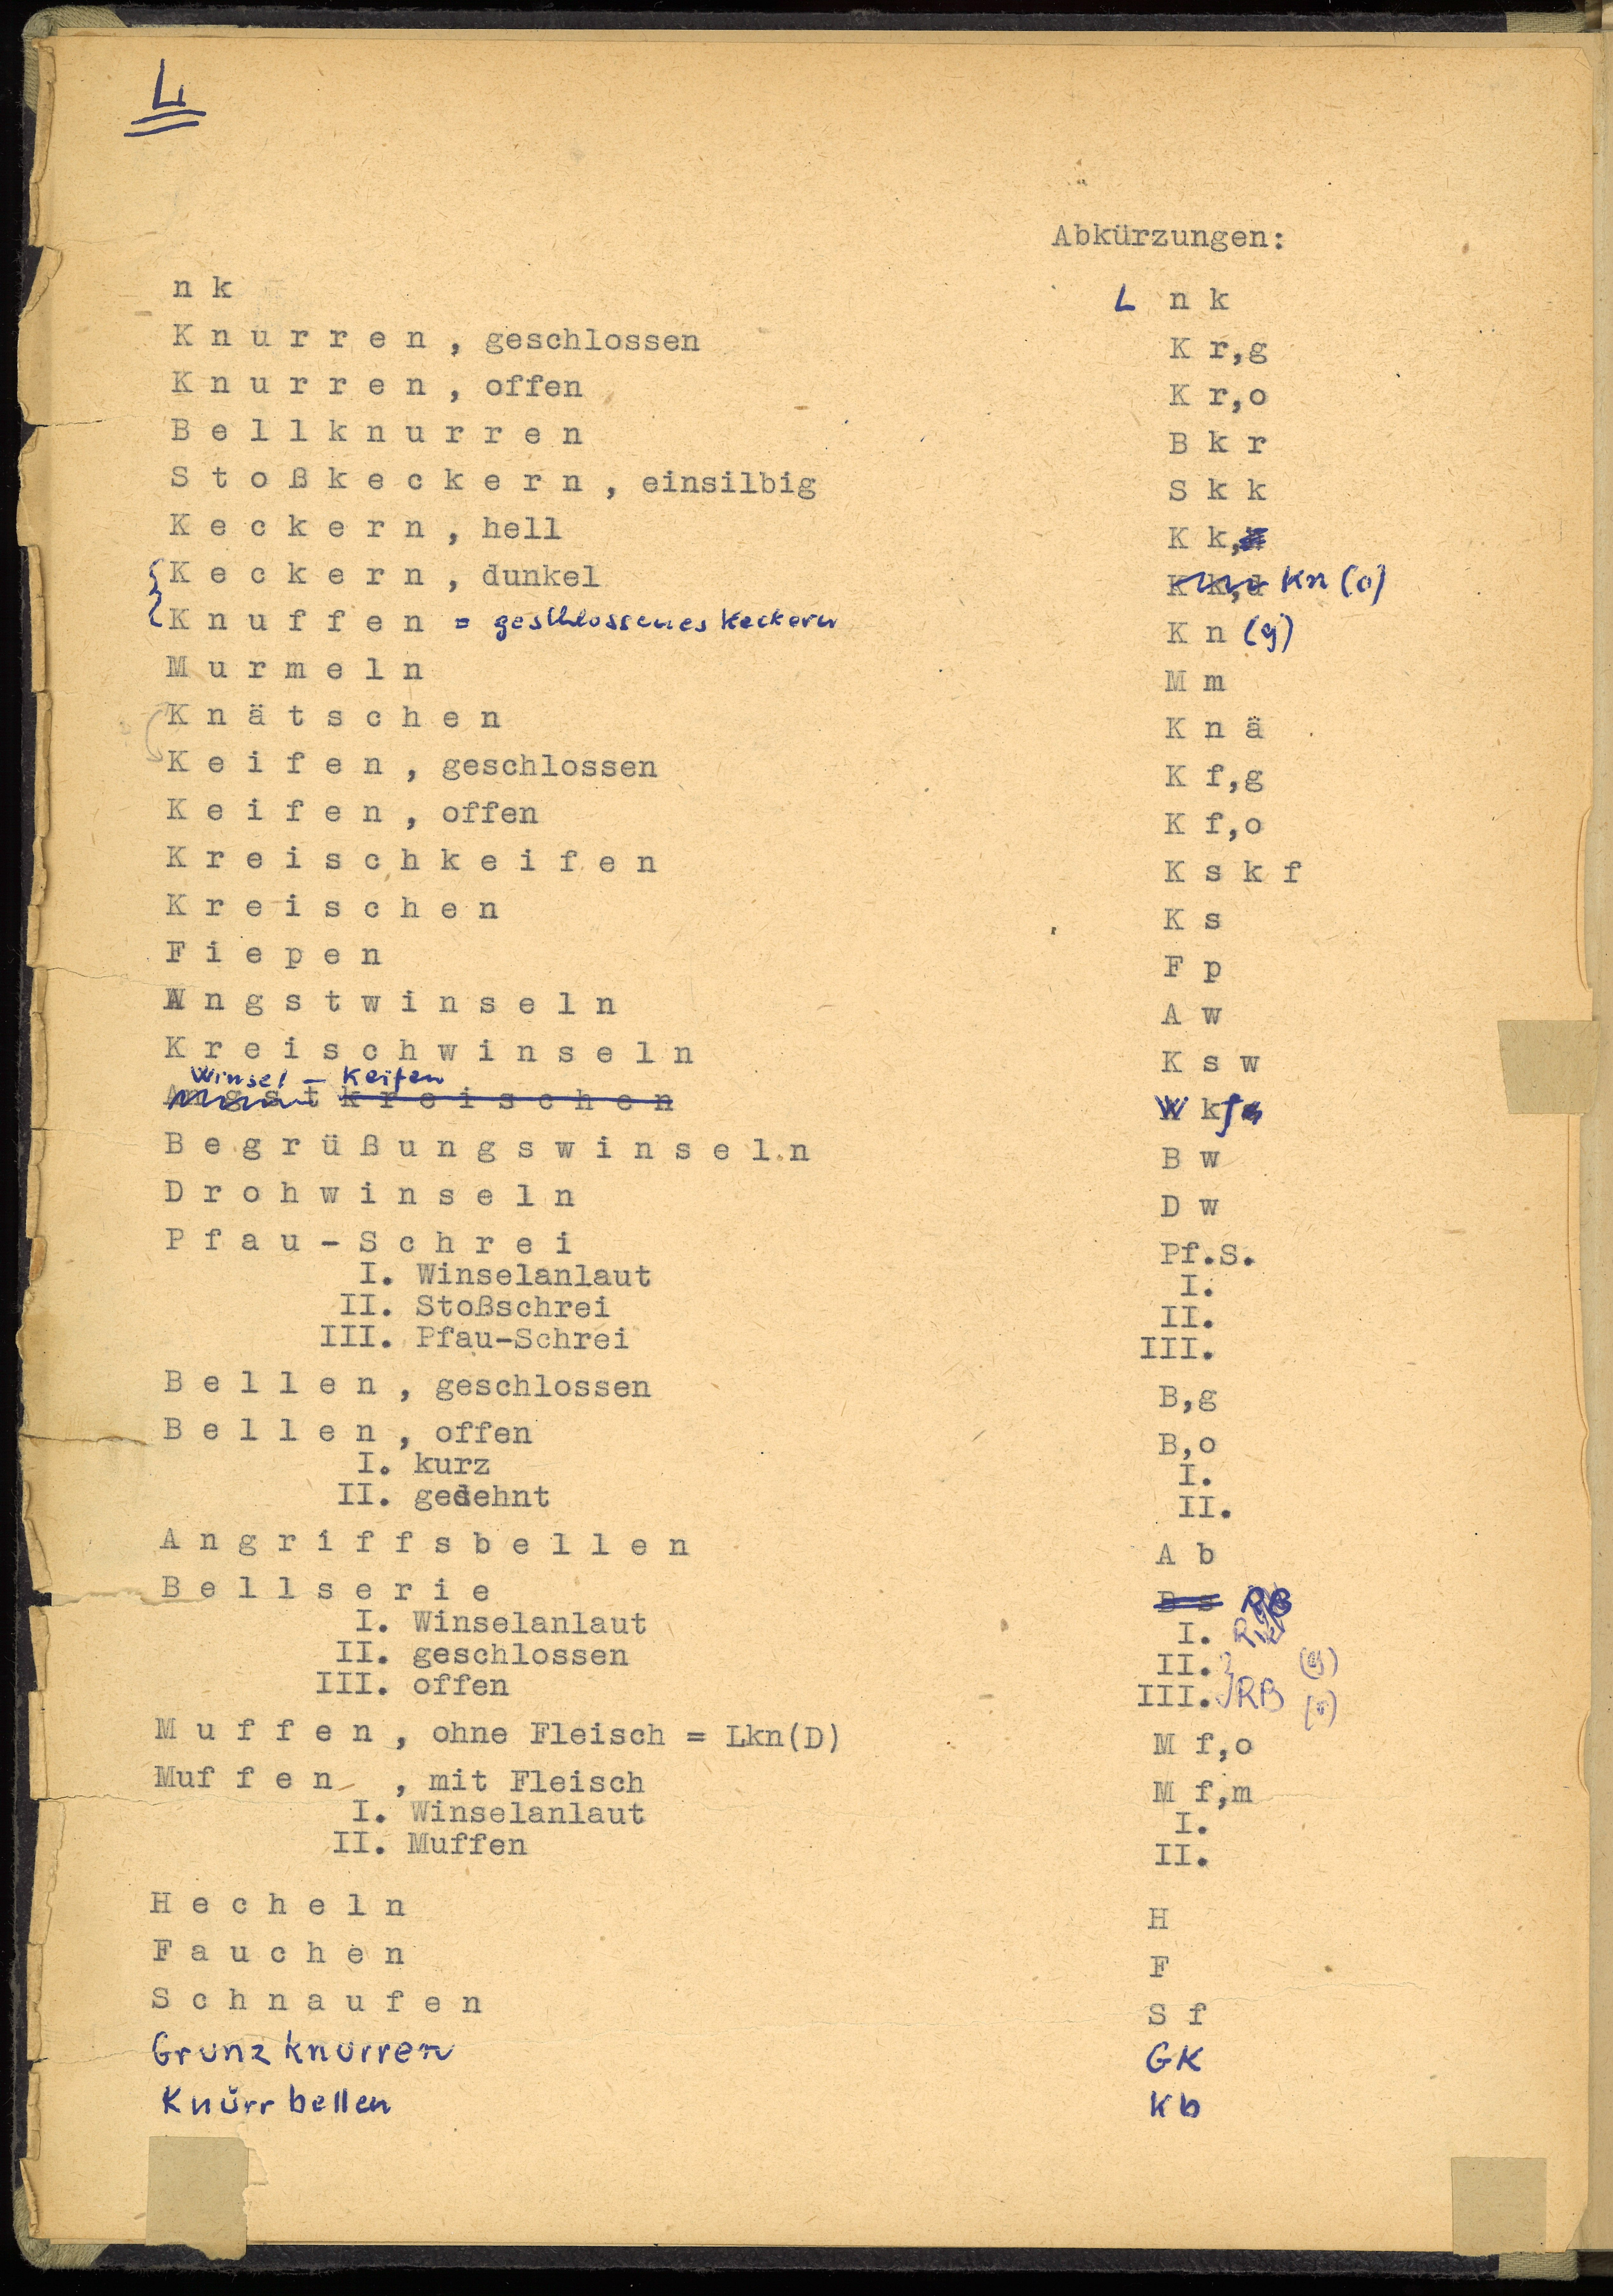 Fig. 3 List of abbreviations for animal sounds on the first page of the researcher’s notebook (1953), © TFSB